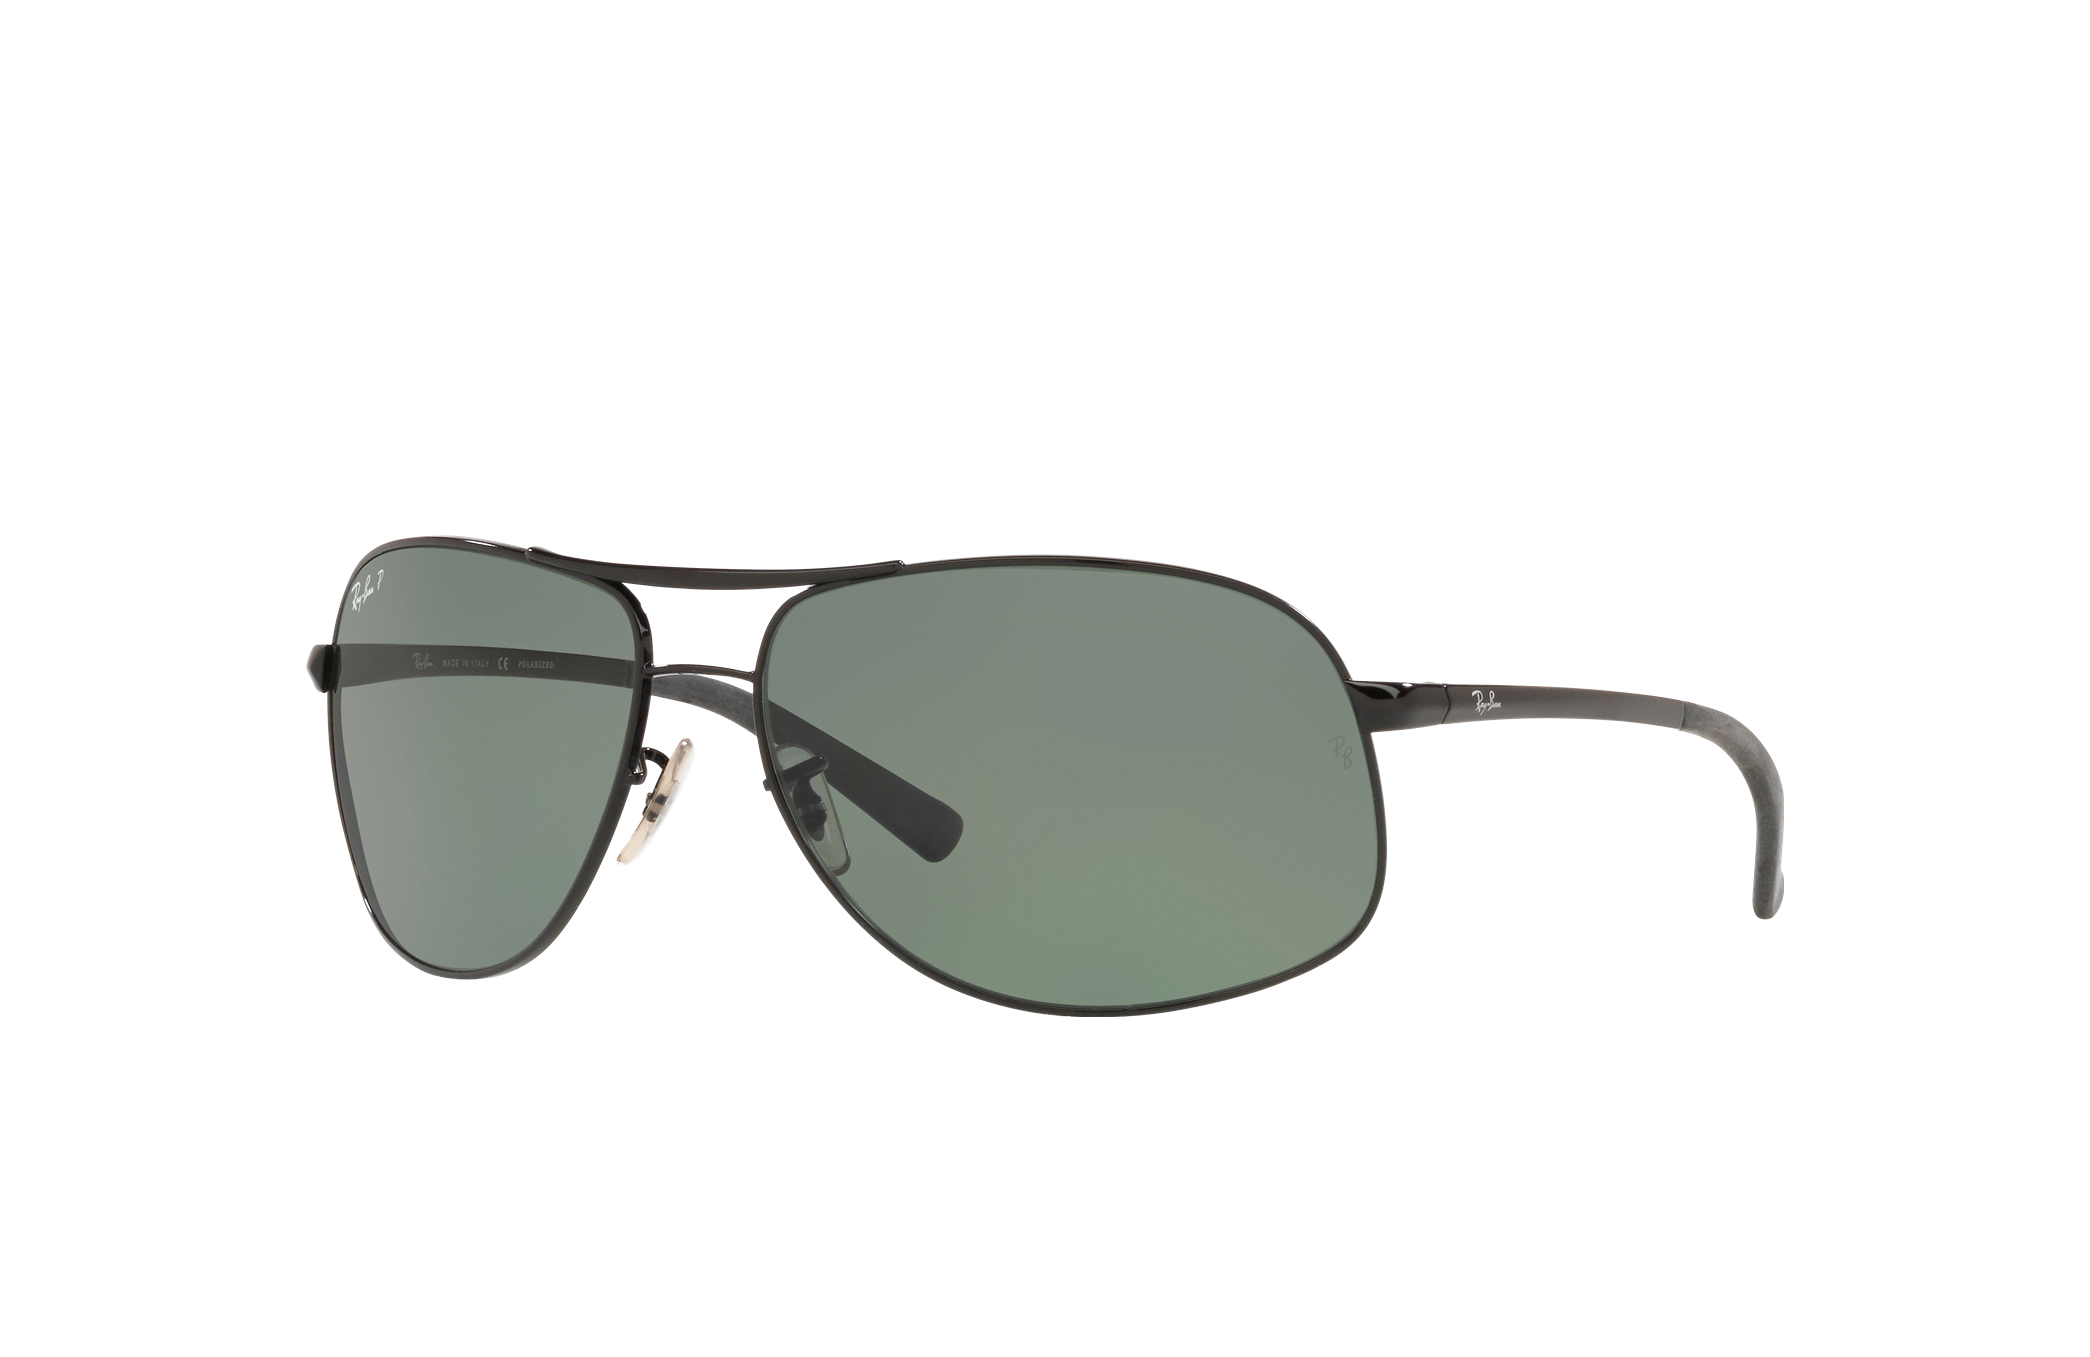 Rb3387 Sunglasses in Black and Green | Ray-Ban®